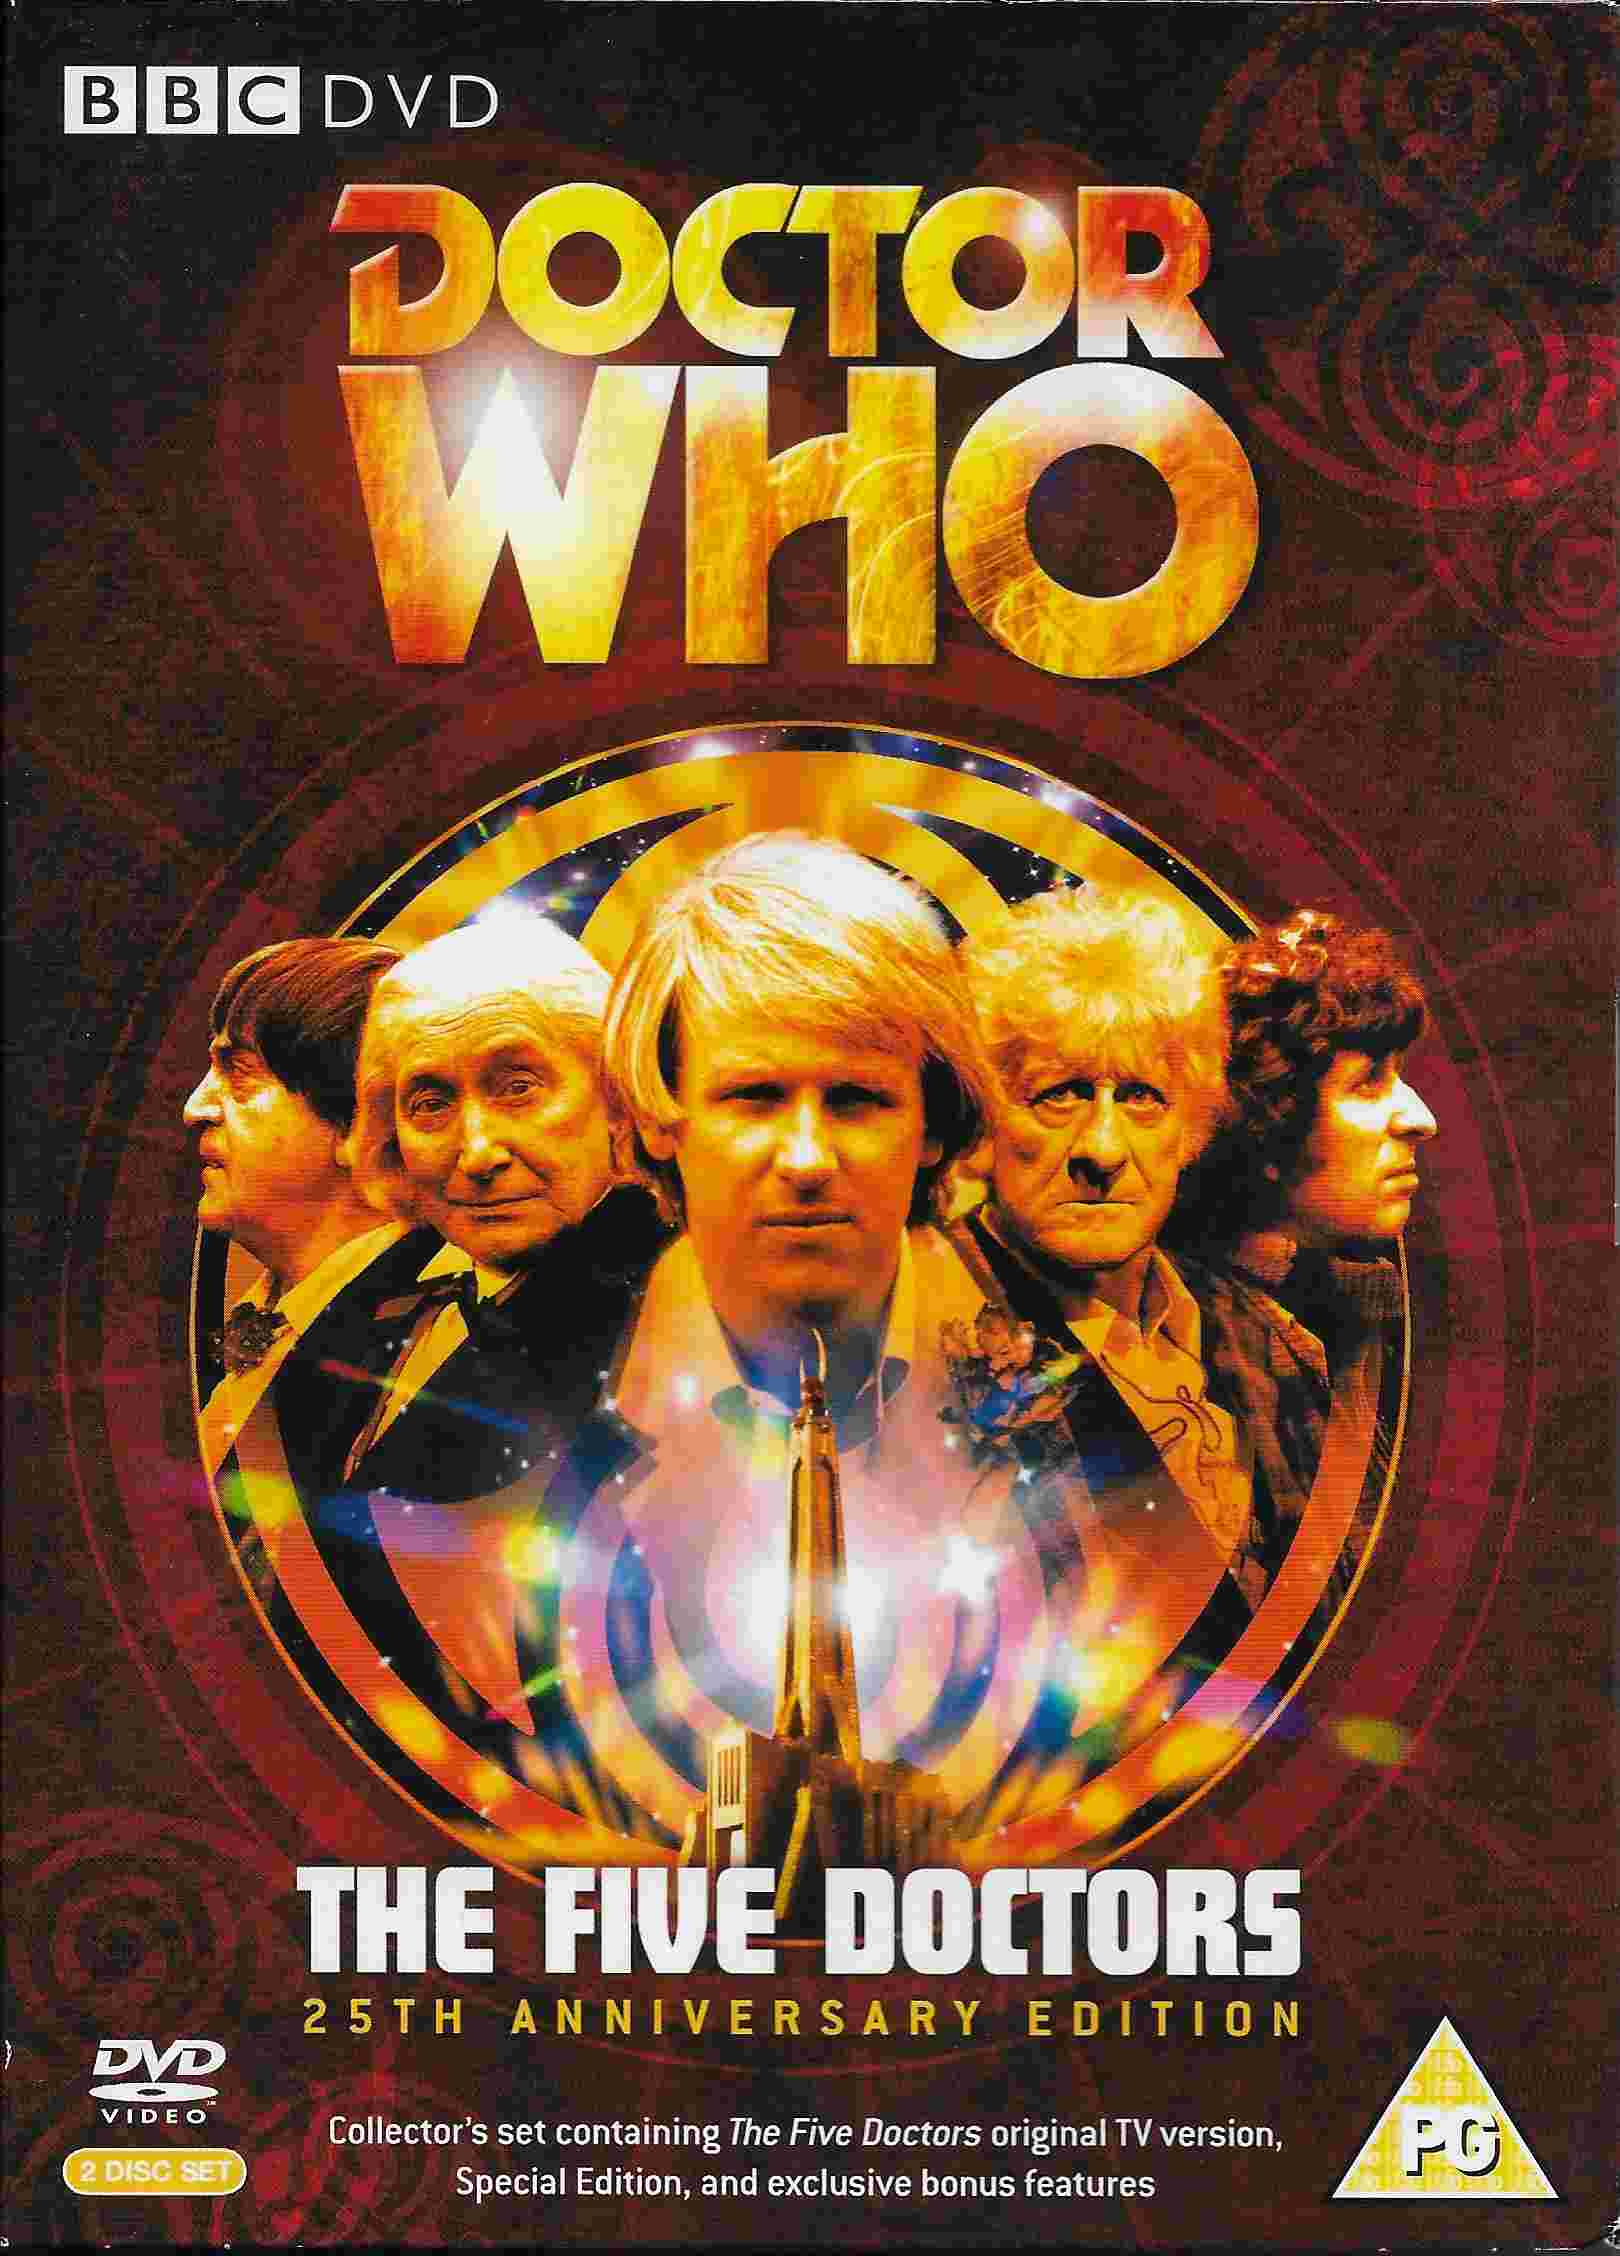 Picture of BBCDVD 2450 Doctor Who - The five Doctors (25th anniversary edition) by artist Terrance Dicks from the BBC dvds - Records and Tapes library